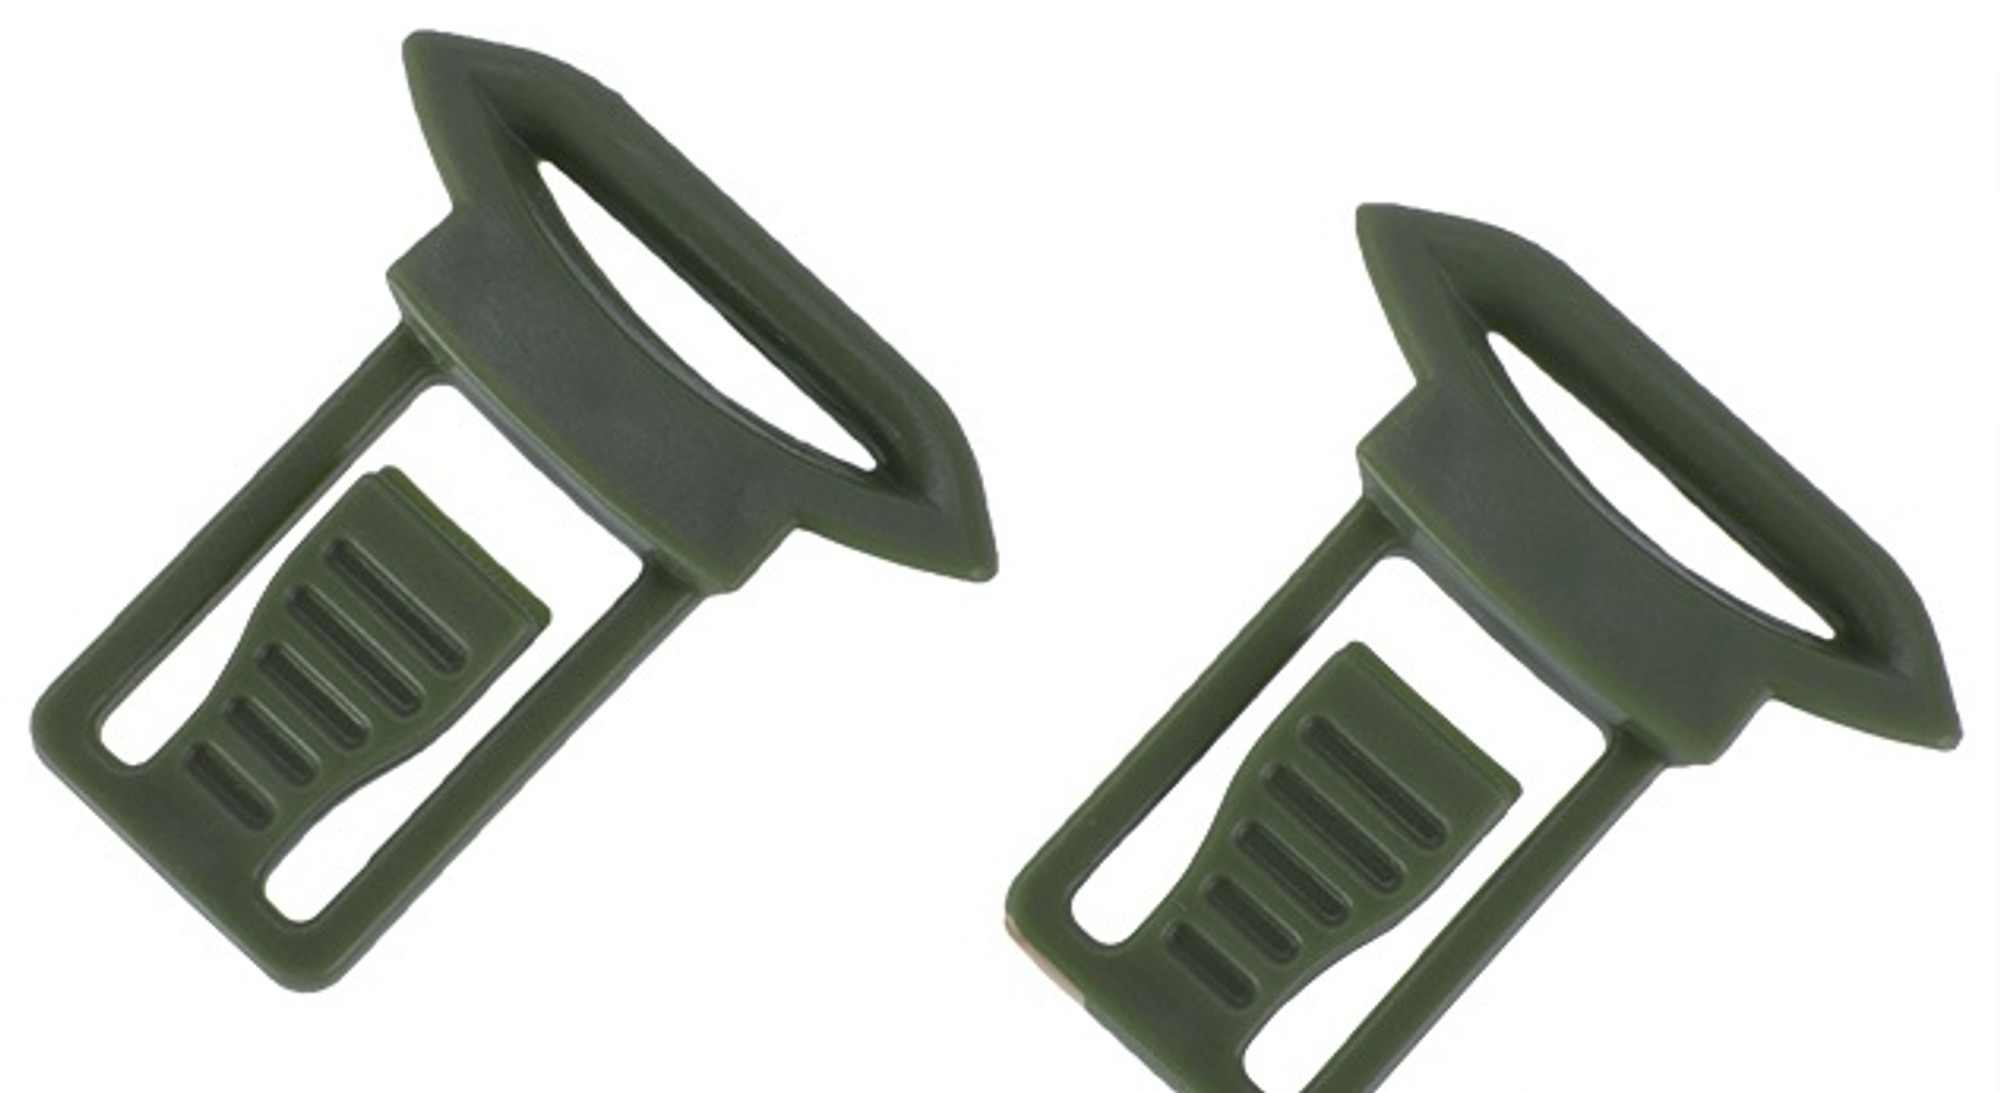 Emerson Replacement Standard Strap Clips For Bump Helmet Rails - Olive Drab